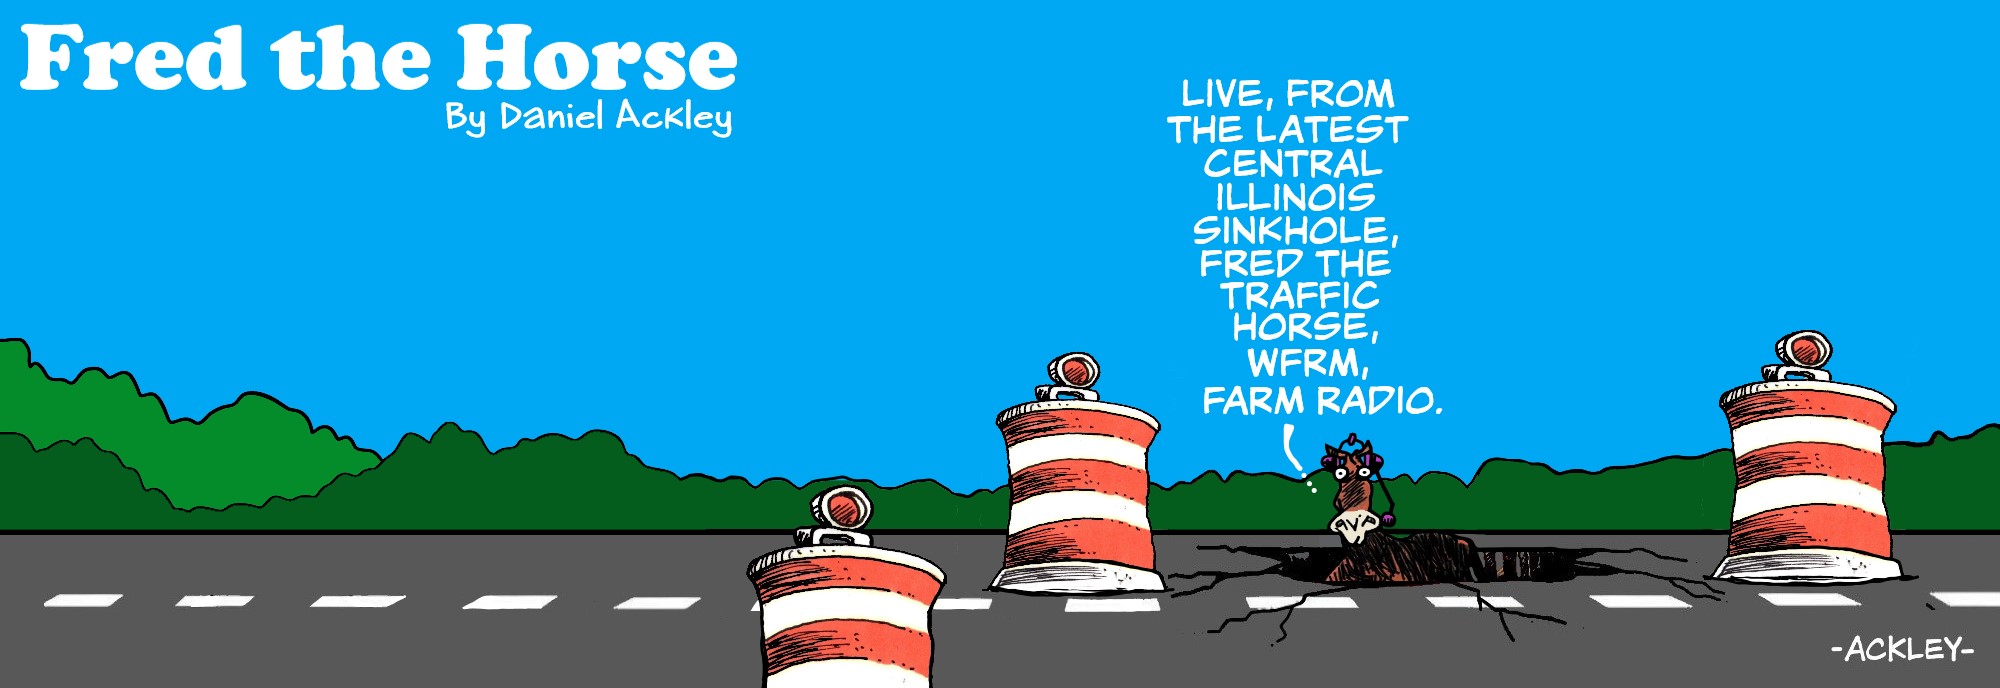 Fred the Horse: A road with construction barrels surrounding a deep hole. A horse in the hole says "Live, from the latest central Illinois sinkhole, Fred the traffic horse, WFRM Farm Radio."